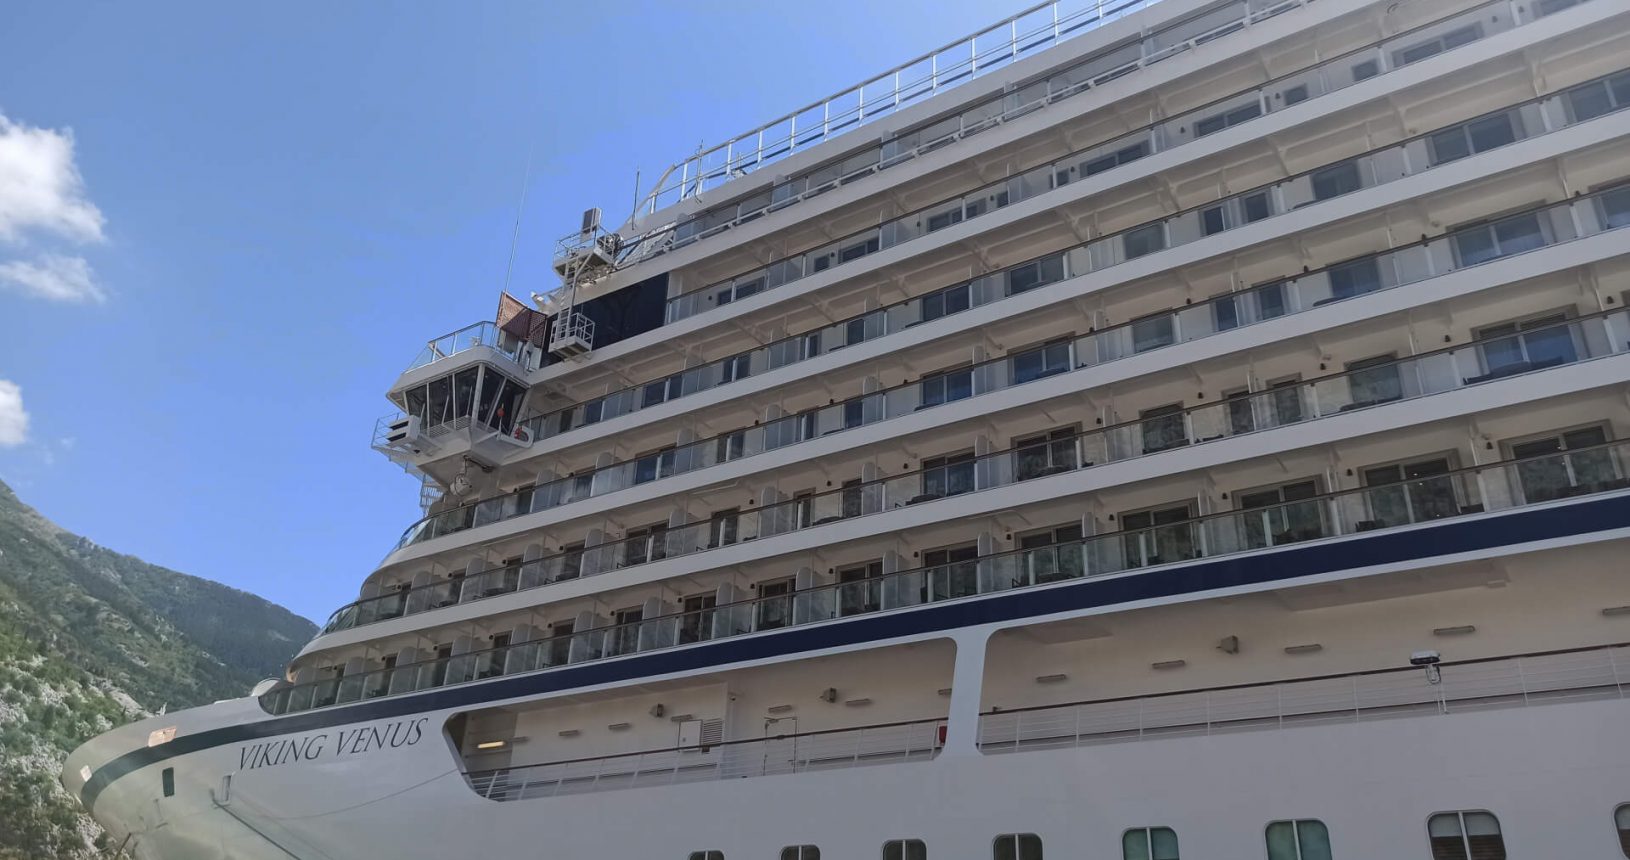 First cruise ship in Kotor this year from close